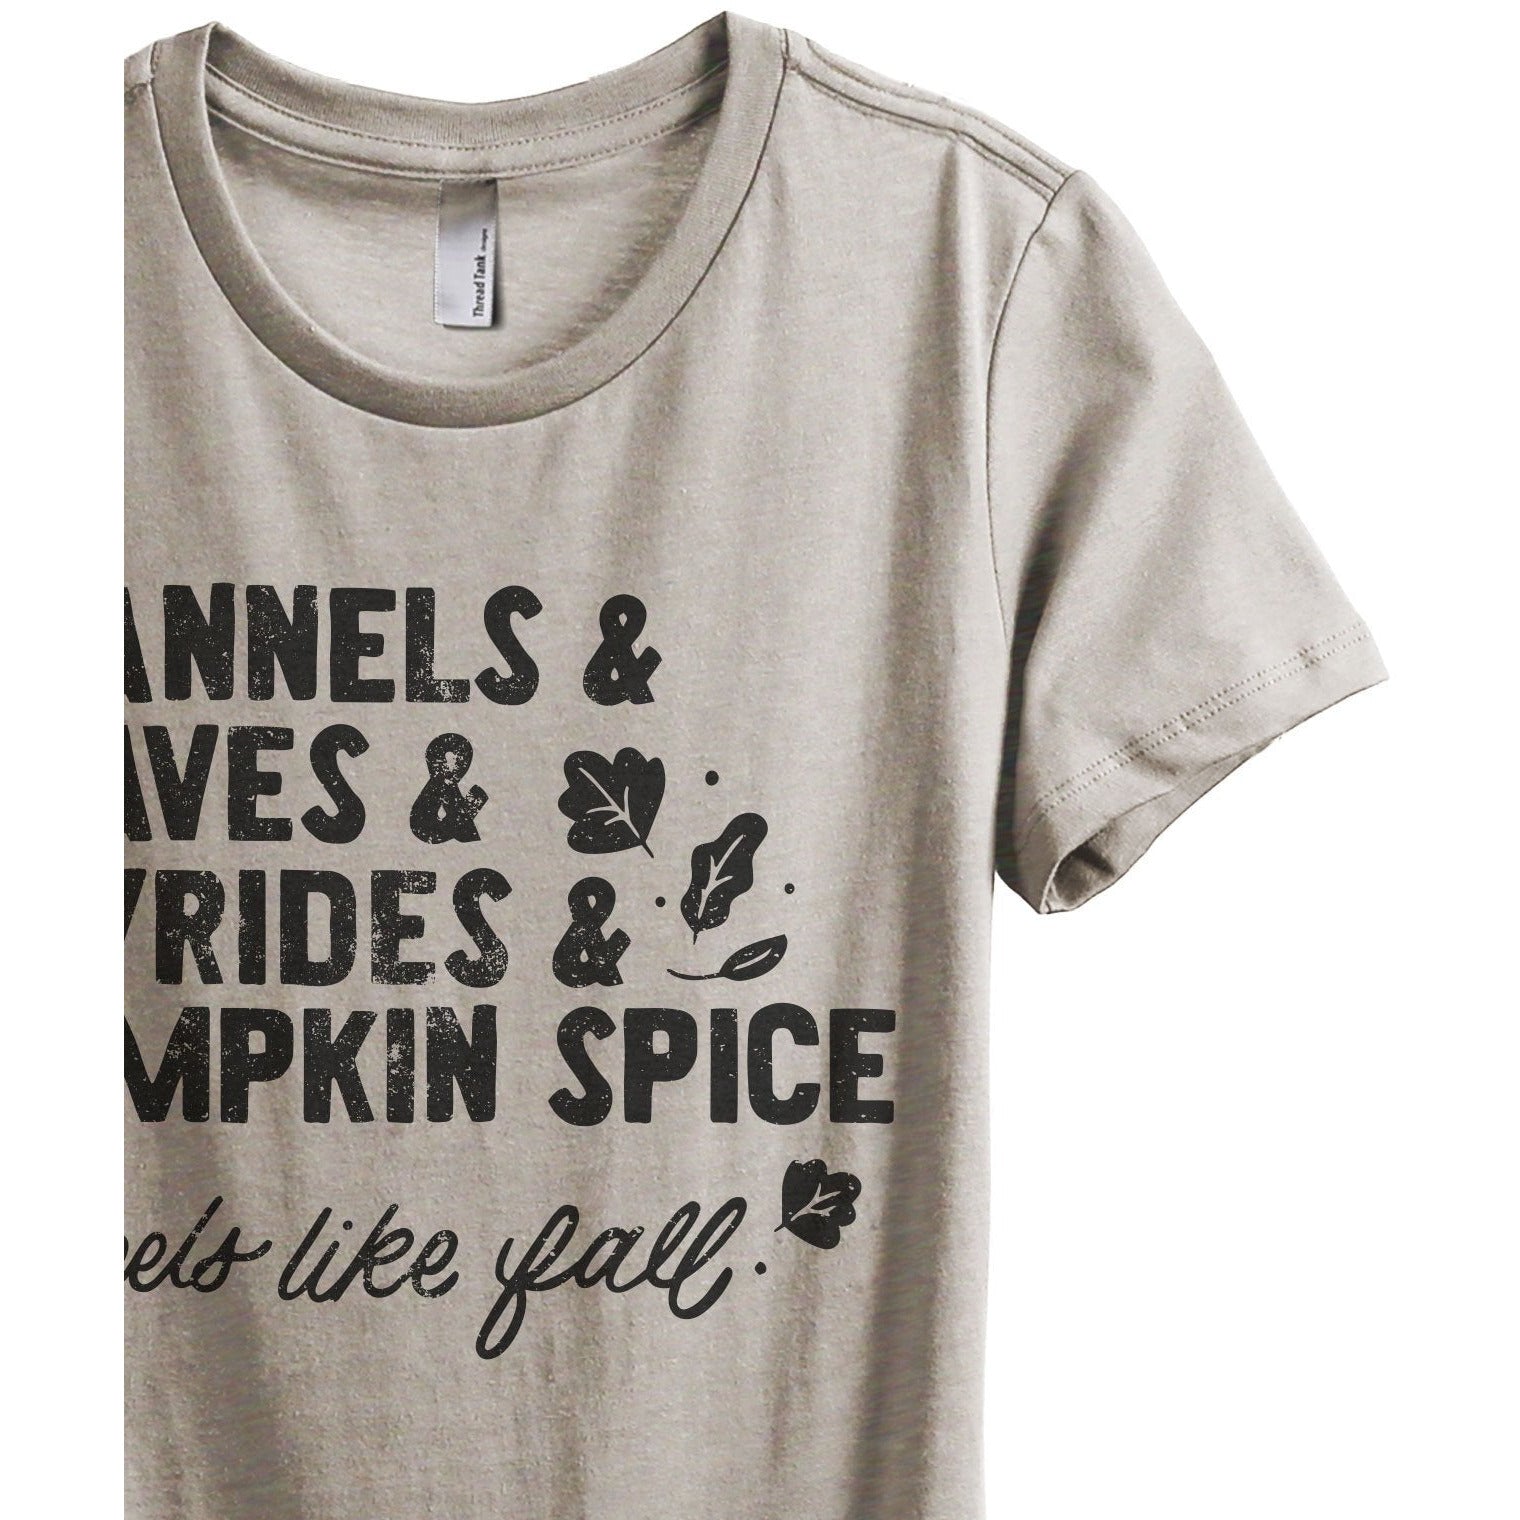 Flannels & Leaves & Hayrides & Pumpkin Spice...Feels like Fall Women's Relaxed Crewneck T-Shirt Top Tee Heather Tan Grey
